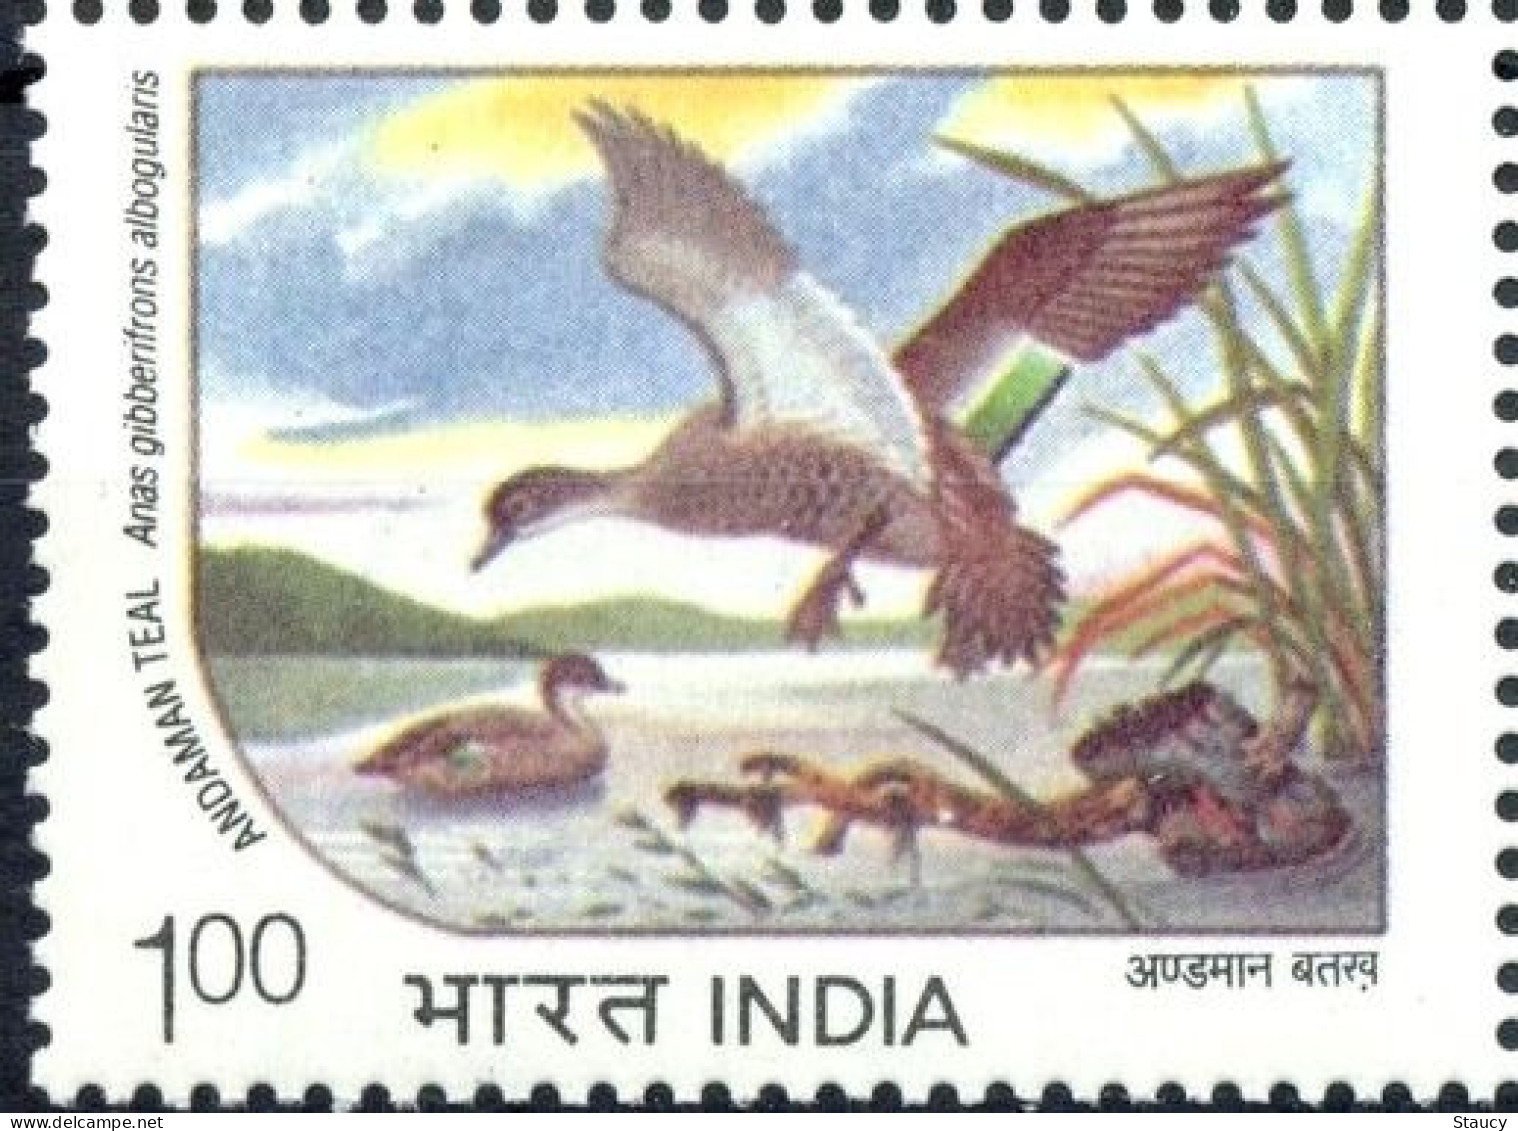 INDIA 1994 Endangered Water Birds 1v STAMP MNH "WITHDRAWN" ISSUE As Per Scan - Gansos